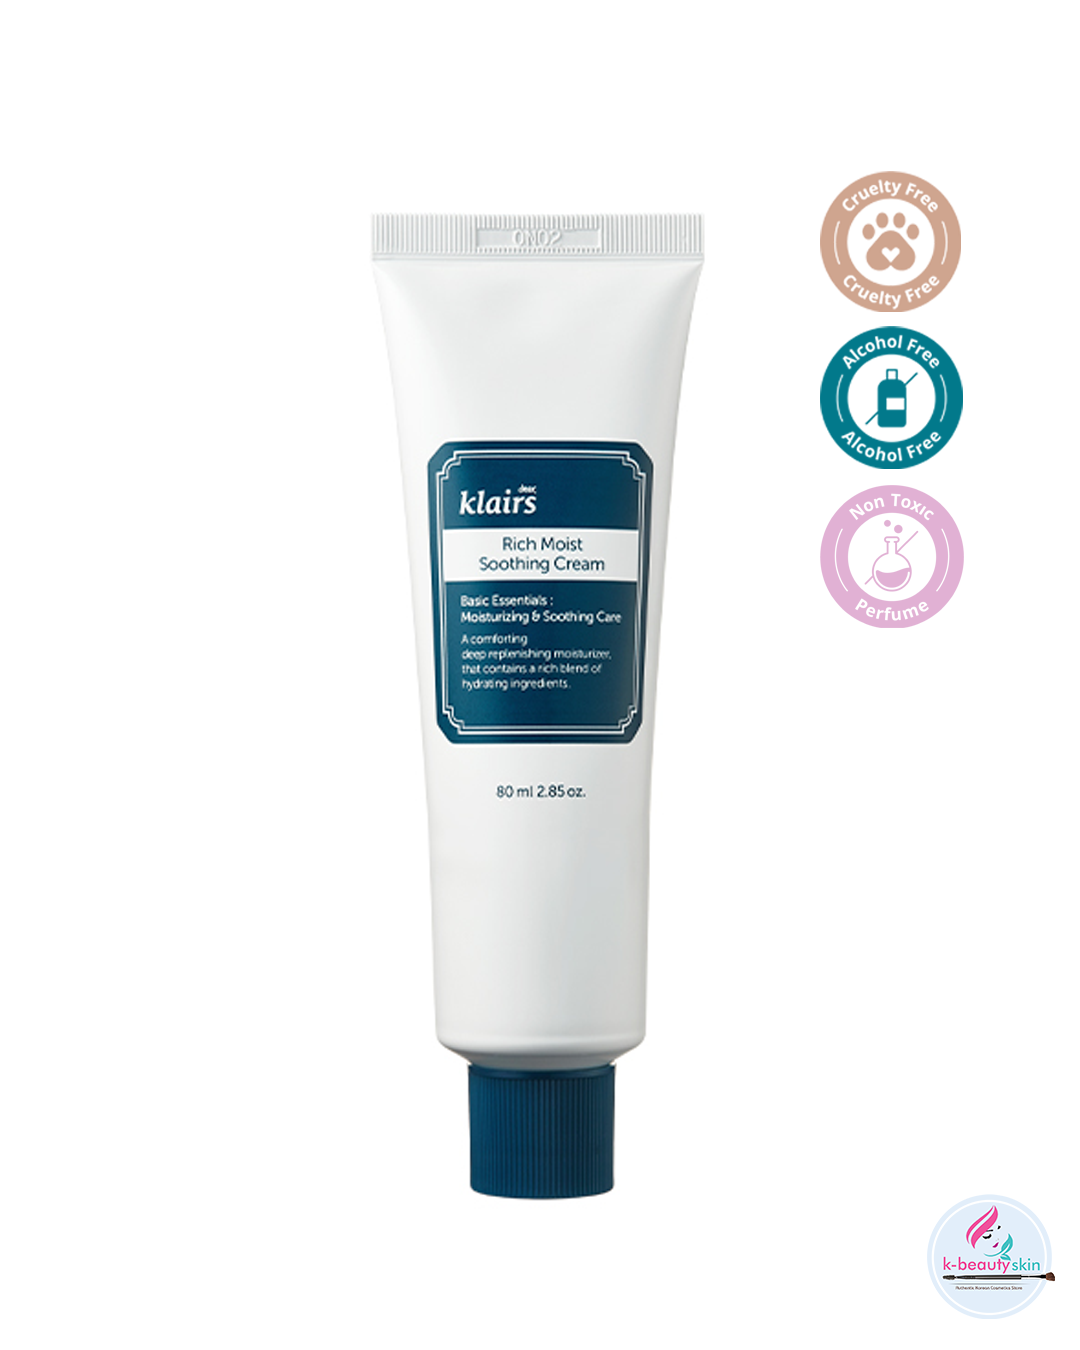 Klairs Rich Moist Soothing Cream 80ml - Instant Absorption, Hydration,  Basic Care, Moisturizer